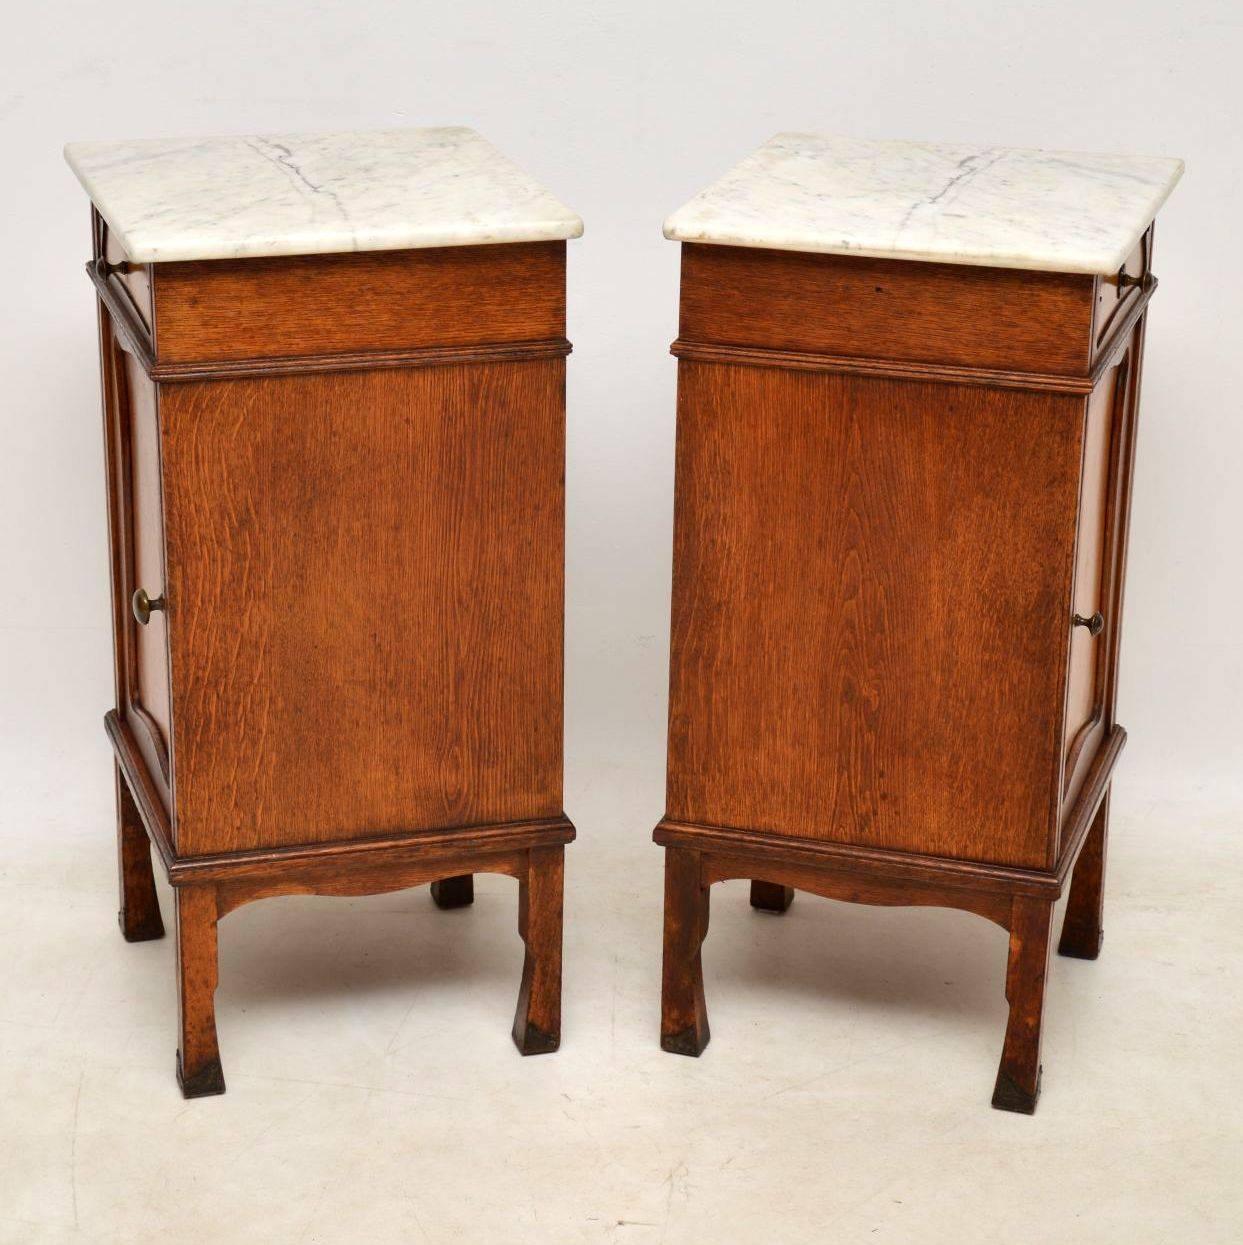 Late 19th Century Pair of Antique French Marble-Top Bedside Cabinets